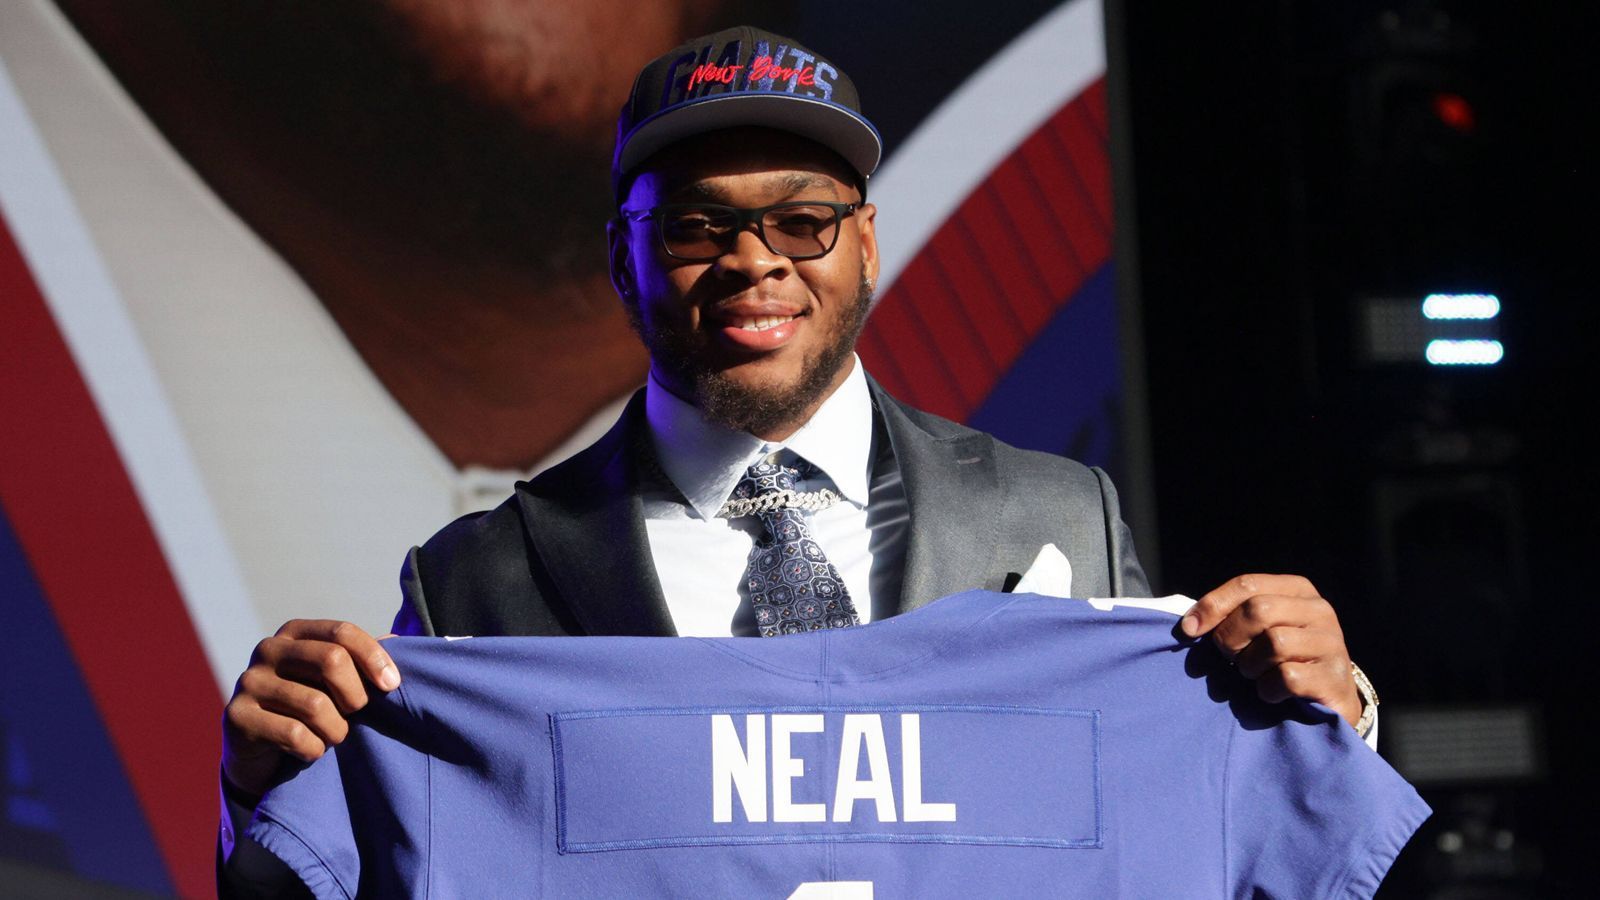 
                <strong>7. Pick: Evan Neal (Offensive Tackle, New York Giants)</strong><br>
                &#x2022; <strong>Vertrag unterschrieben: ja</strong><br>&#x2022; <strong>Signing Bonus</strong>: 15.035.460 US-Dollar<br>&#x2022; <strong>Gesamtgehalt</strong>: 24.551.258 US-Dollar<br>
              